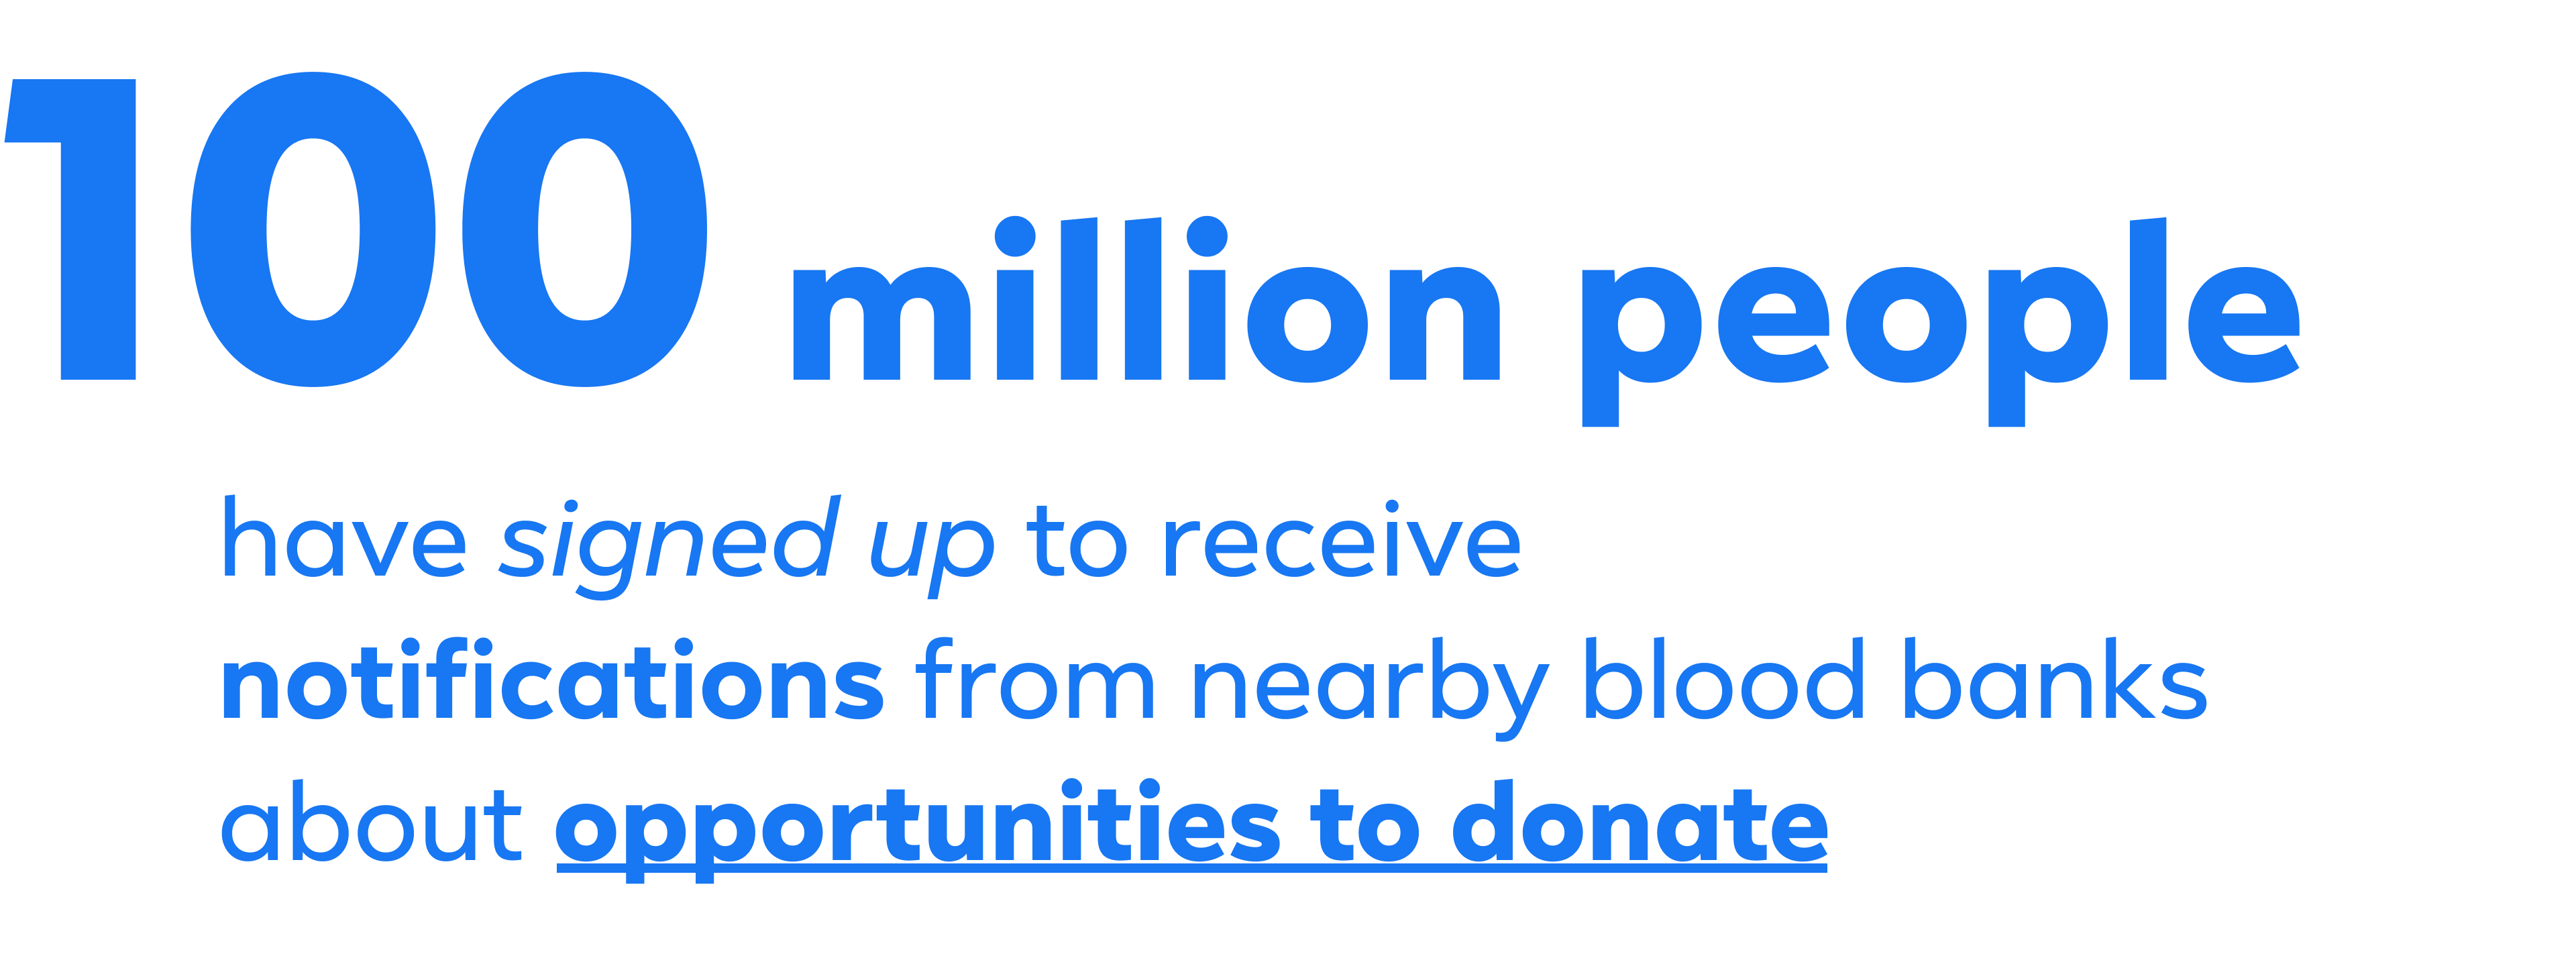 100M Blood Donations stat graphic